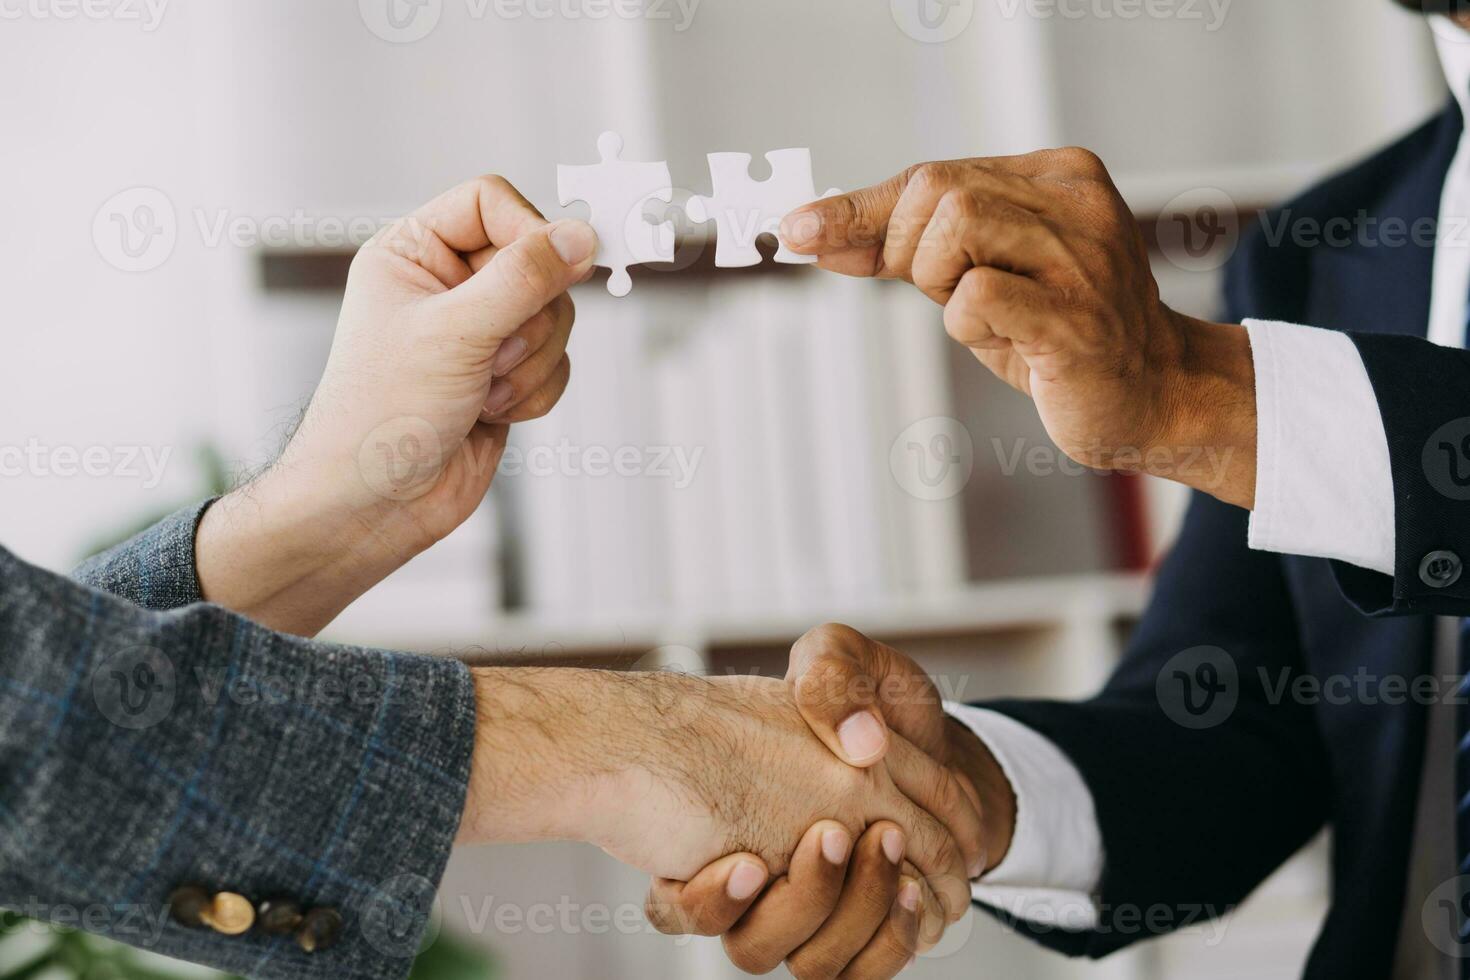 Image of business partners handshaking over business objects on workplace photo